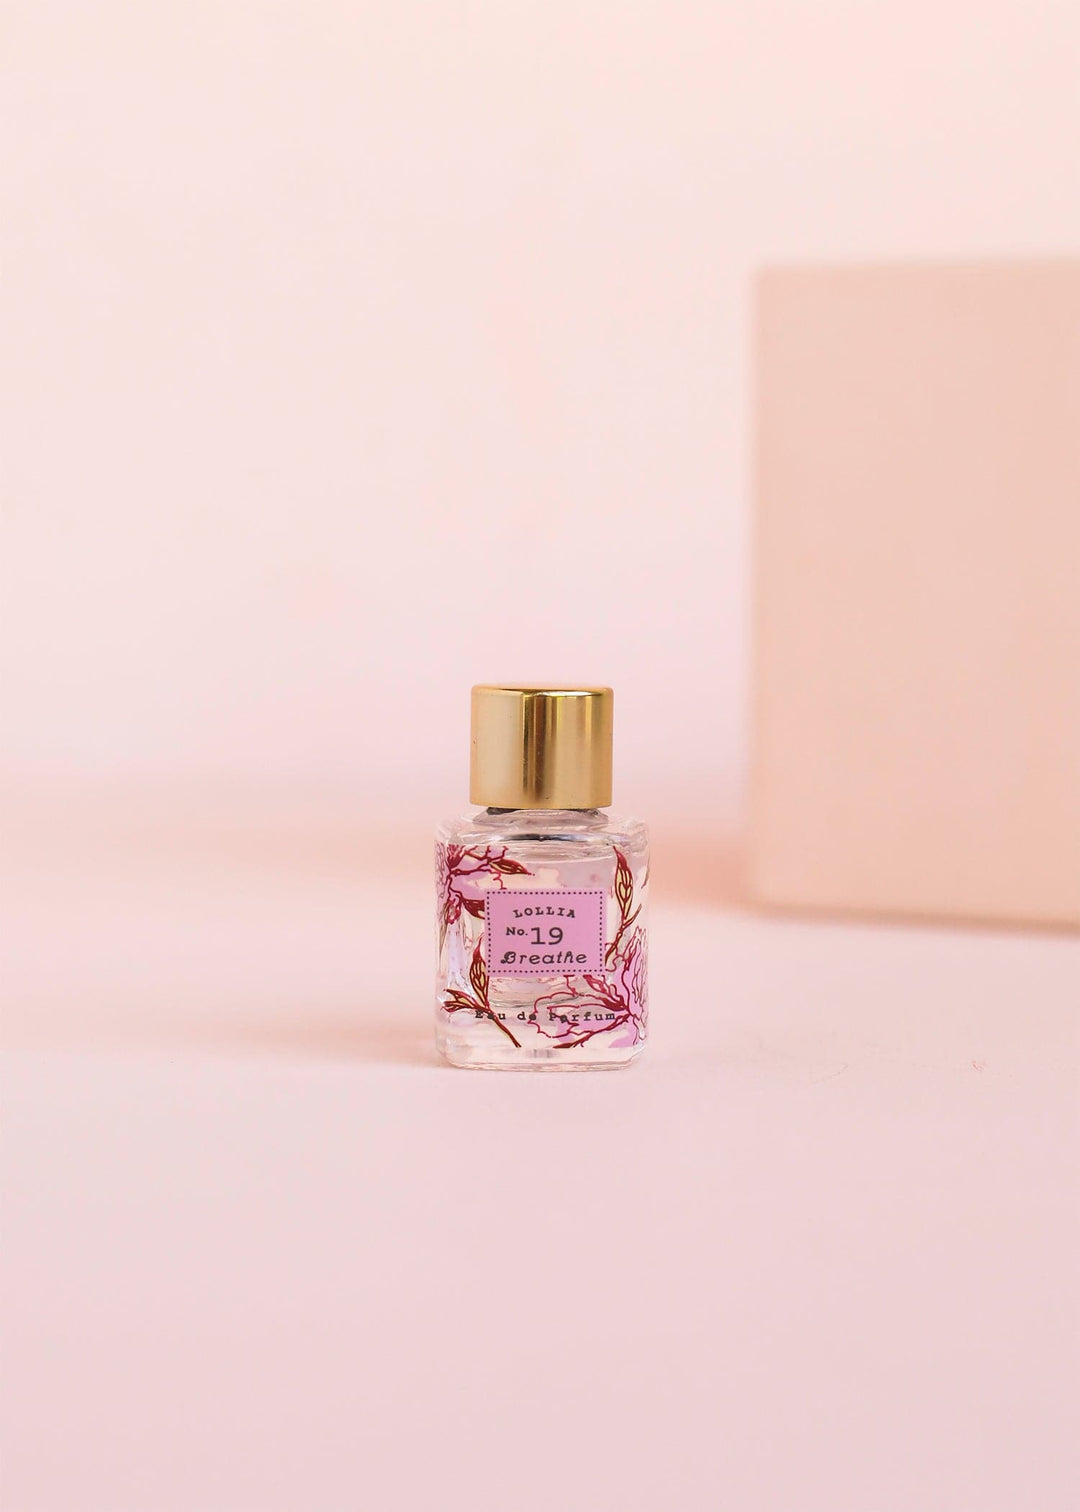 Little Femme by Zara » Reviews & Perfume Facts